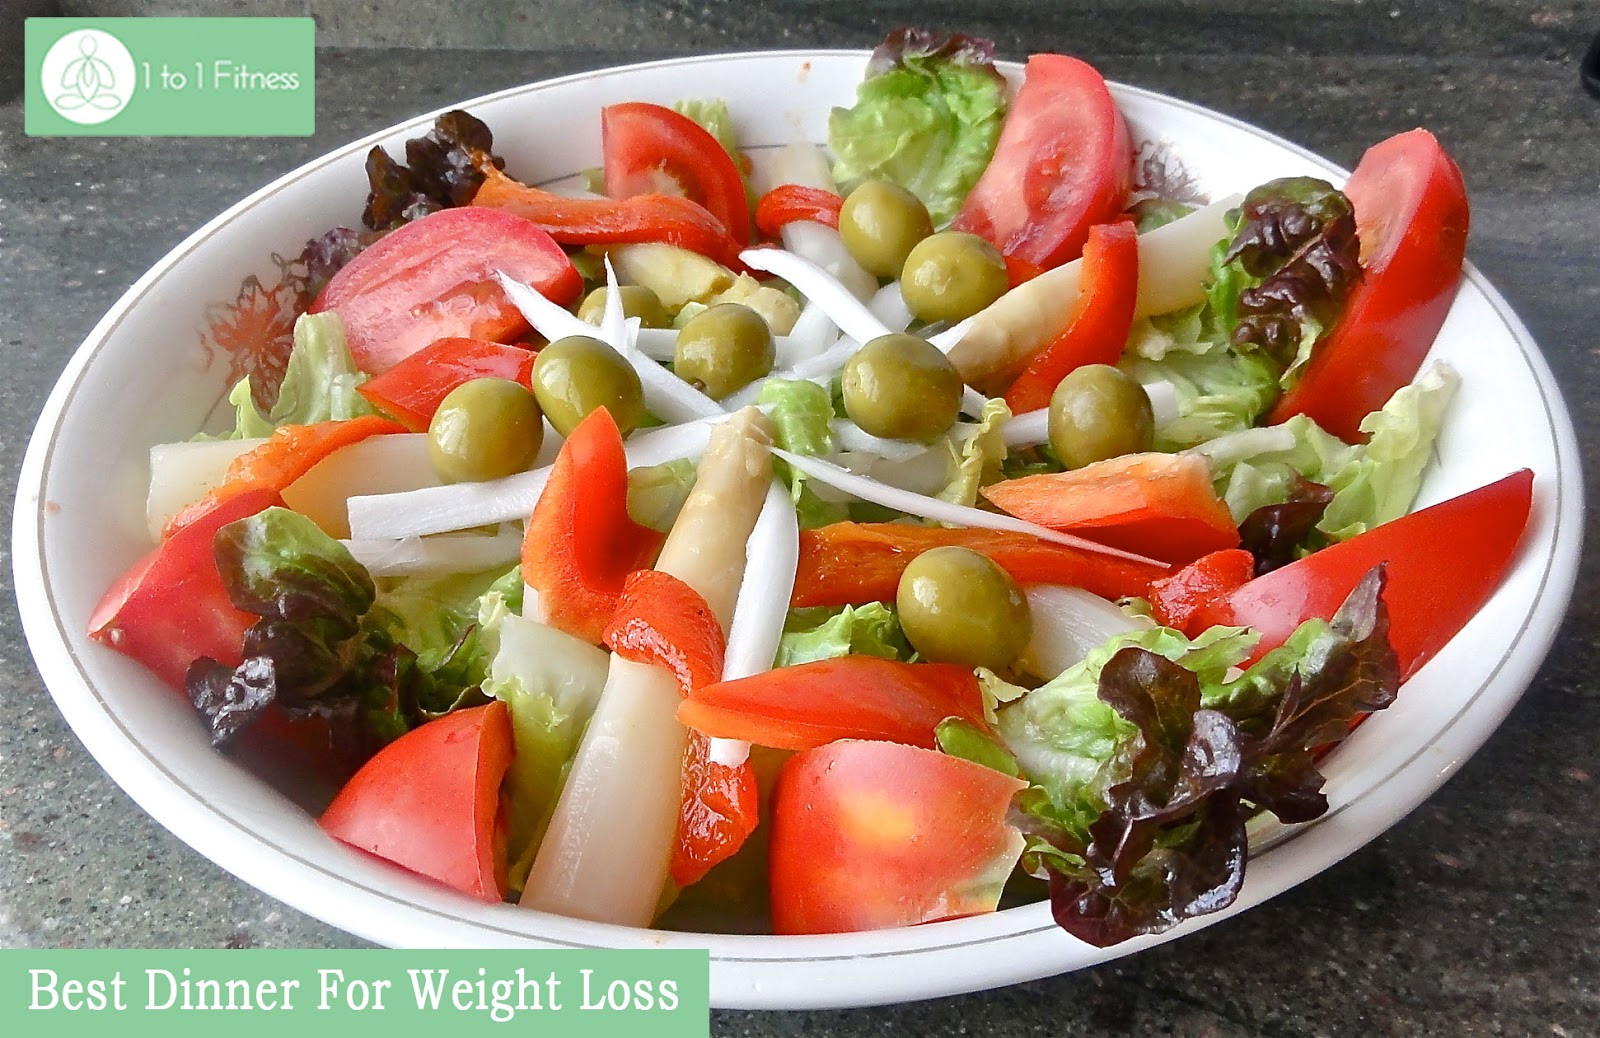 Healthy Salad Recipes For Weight Loss
 Which Is The Best Diet Plan For Weight Loss 1 to 1 Fitness